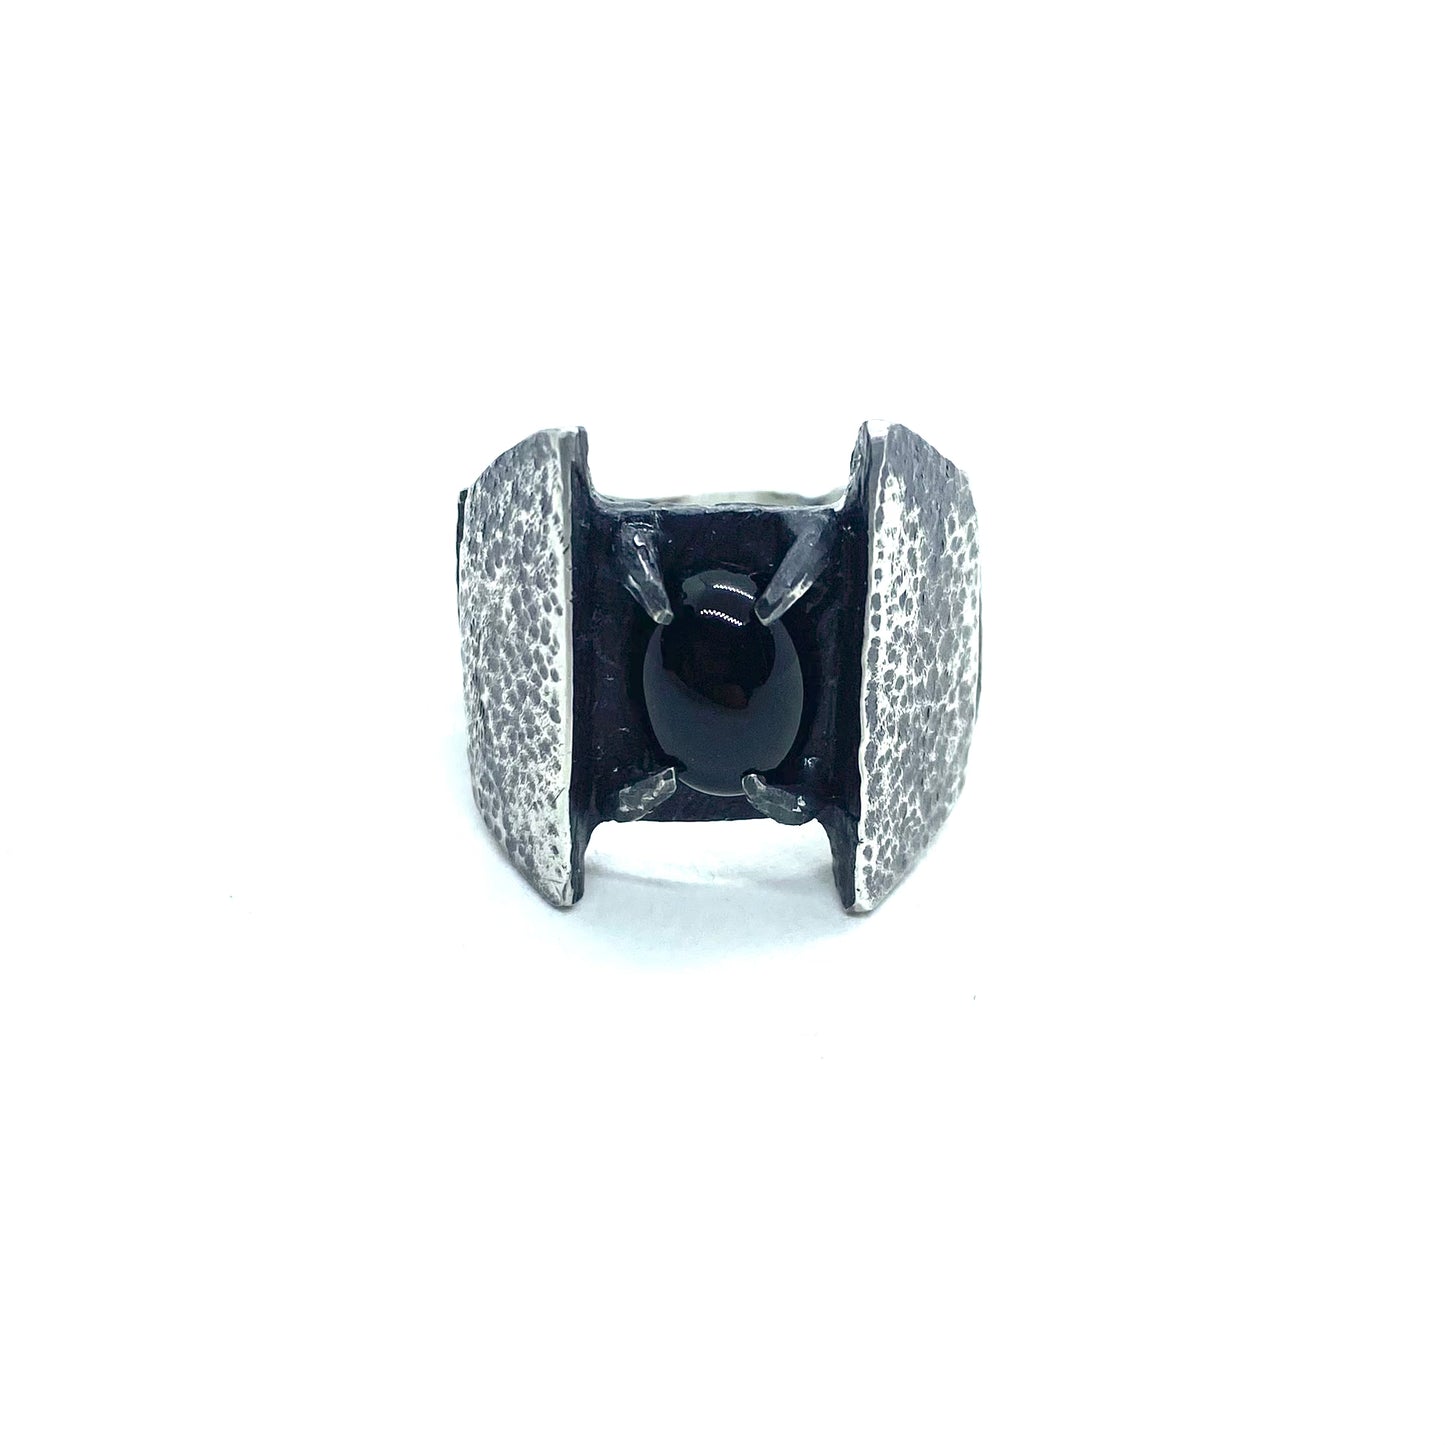 Blackguard’s Ring with Black Onyx in Sterling Silver